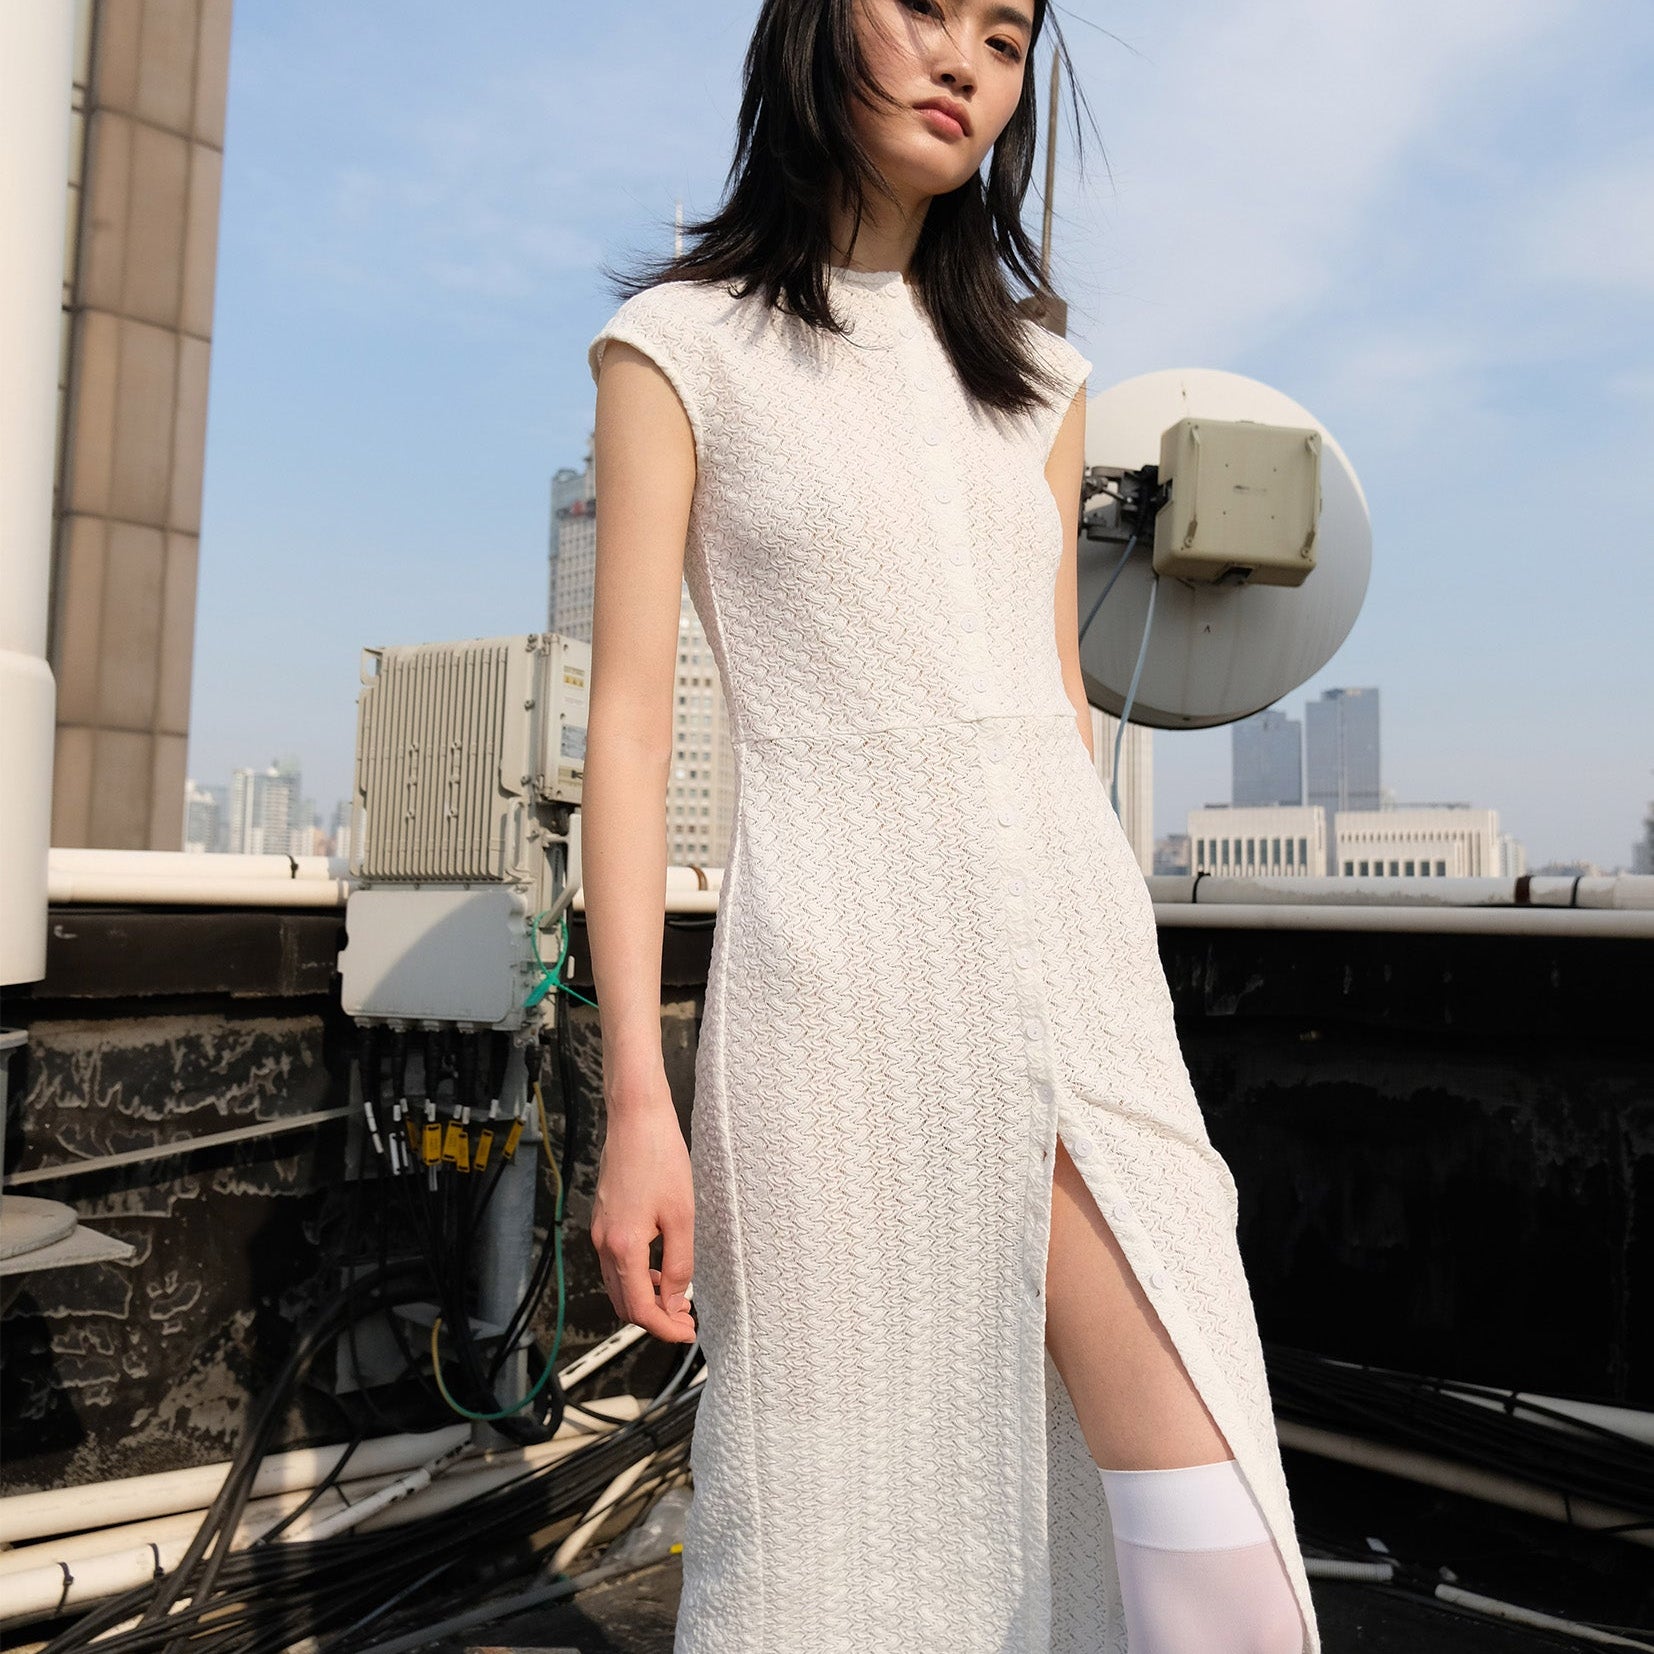 Two-way cap sleeve long knit cardigan slit dress in white